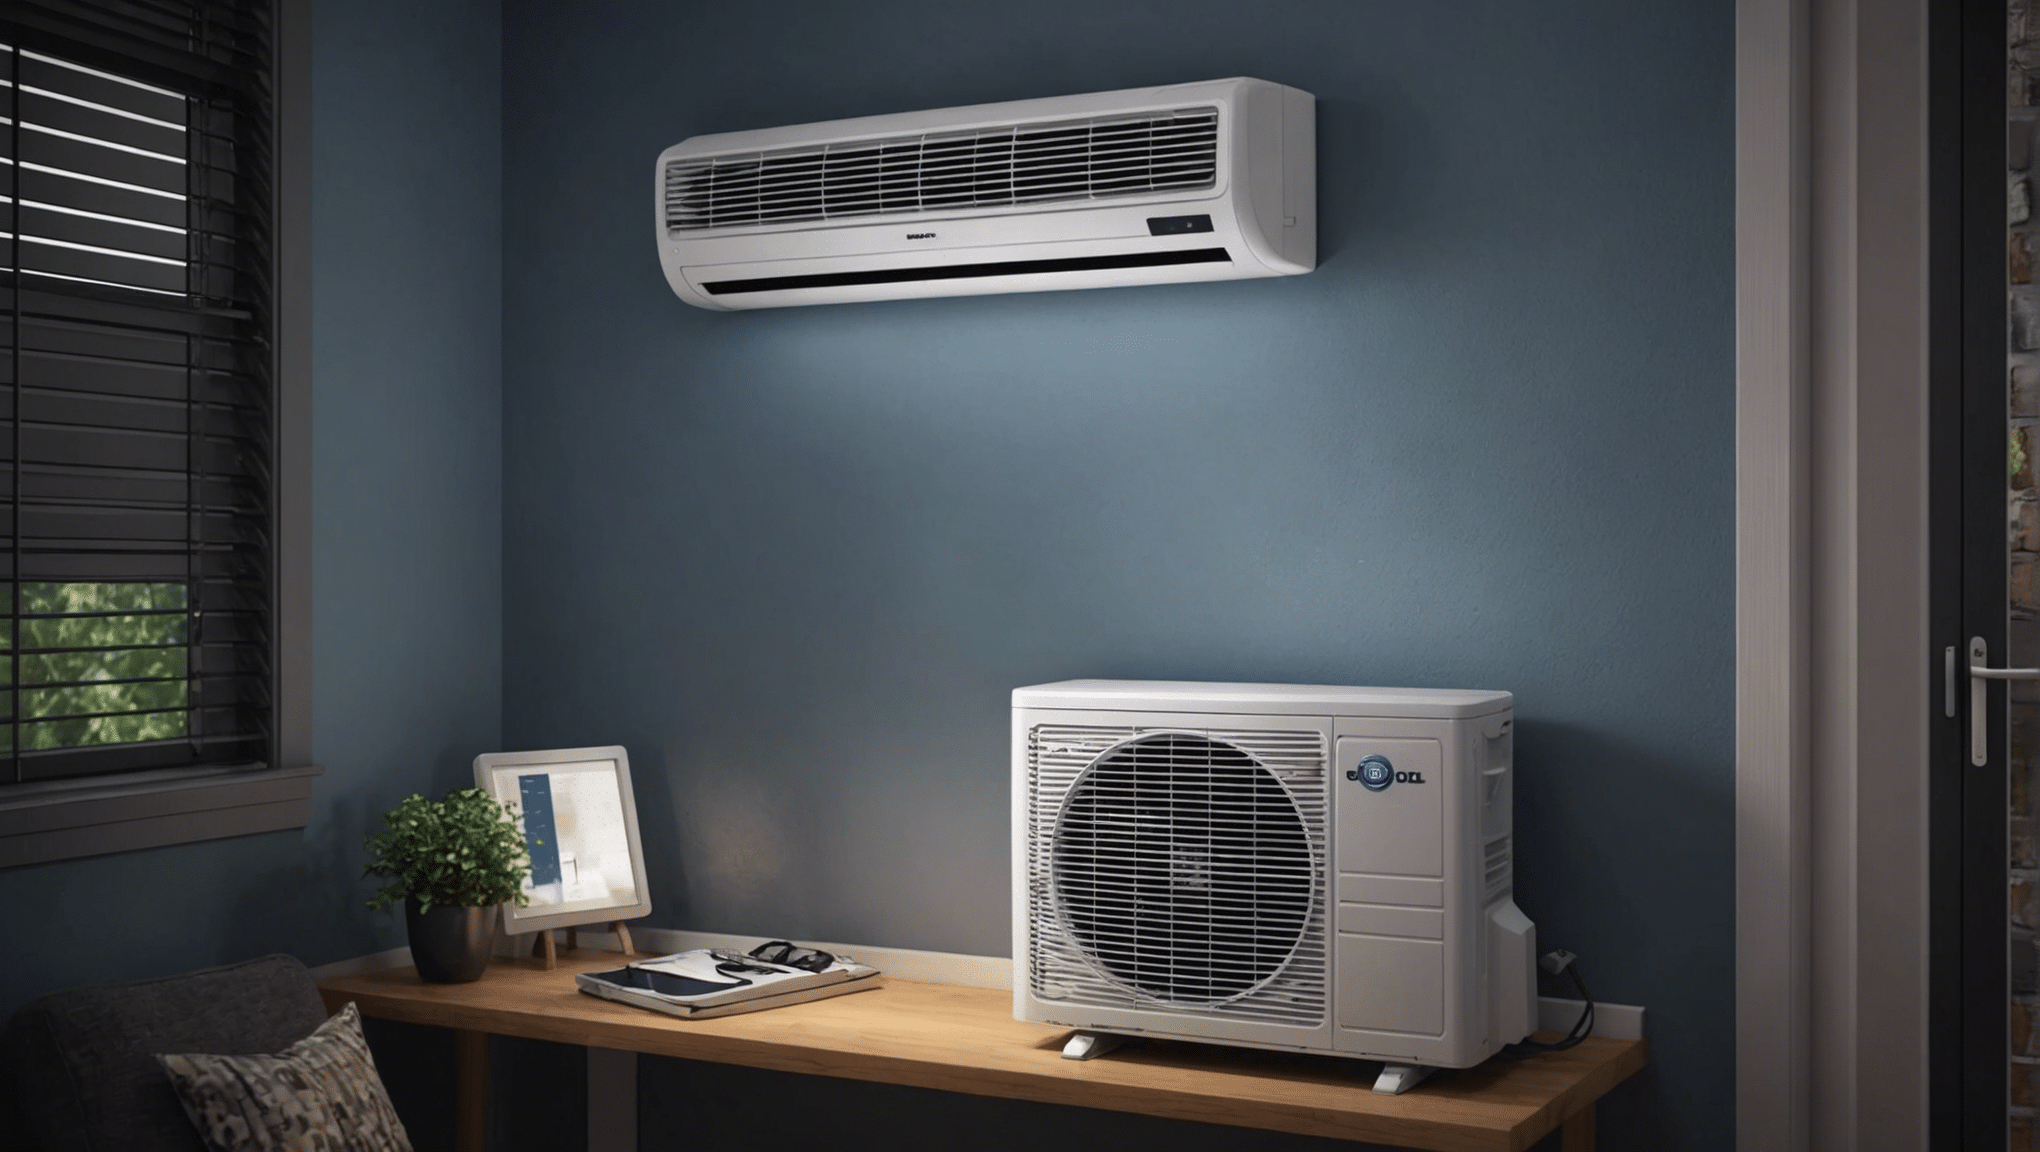 discover whether it's better to turn off your ac at night or keep it running for a comfortable sleep. learn the pros and cons of each option and make an informed decision for a good night's rest.